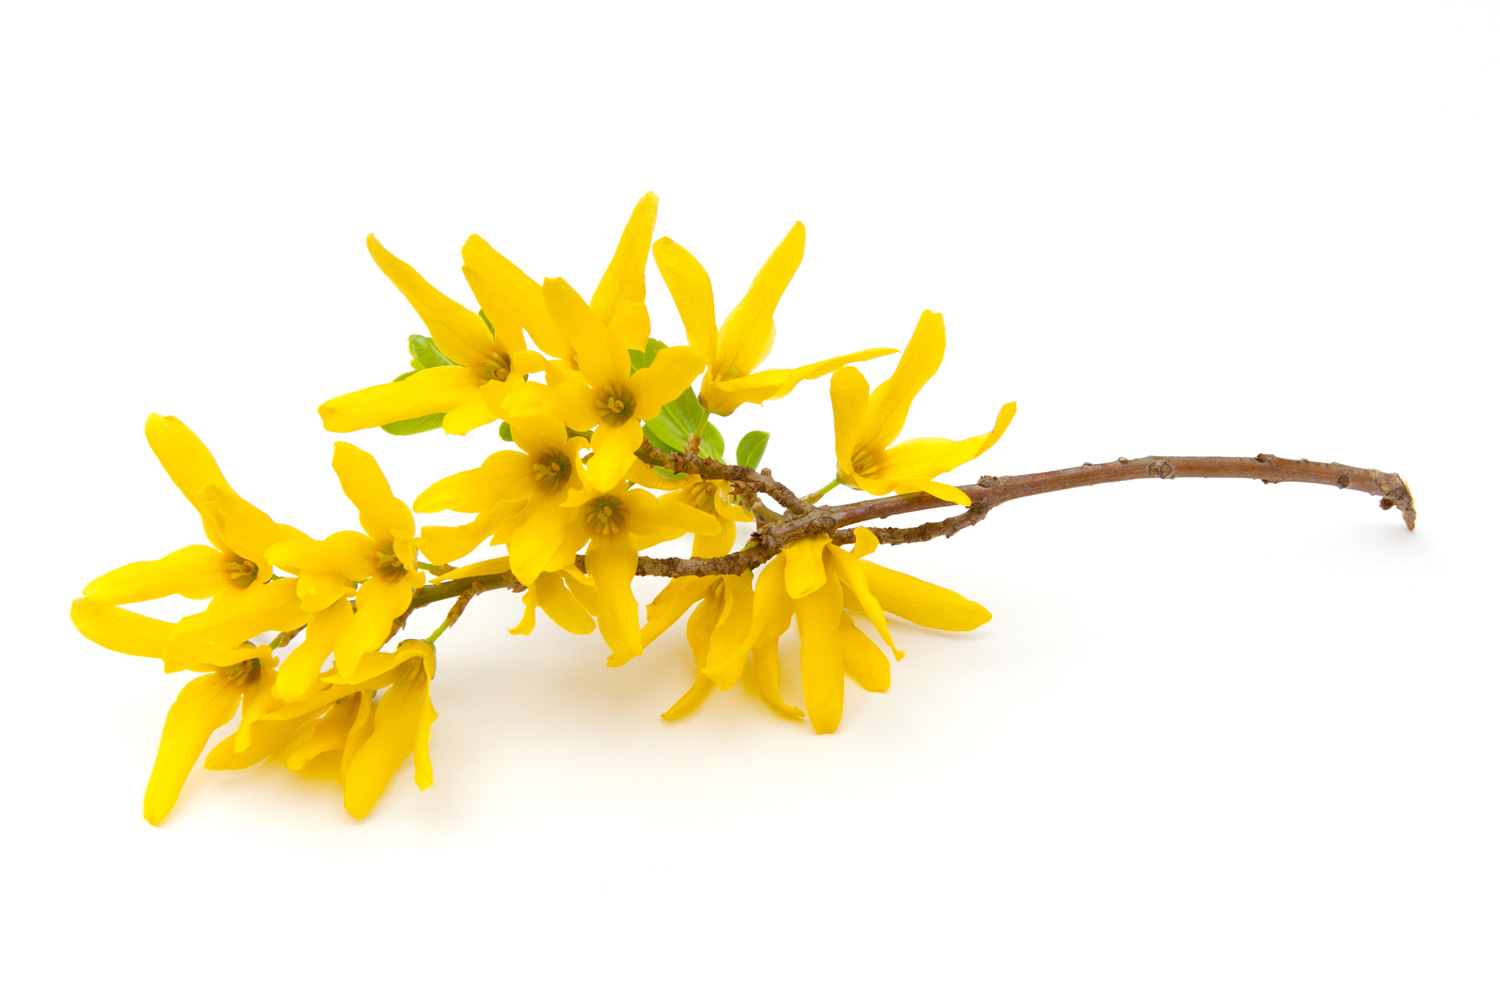 Forsythia (Oleaceae) flowers on a white background.